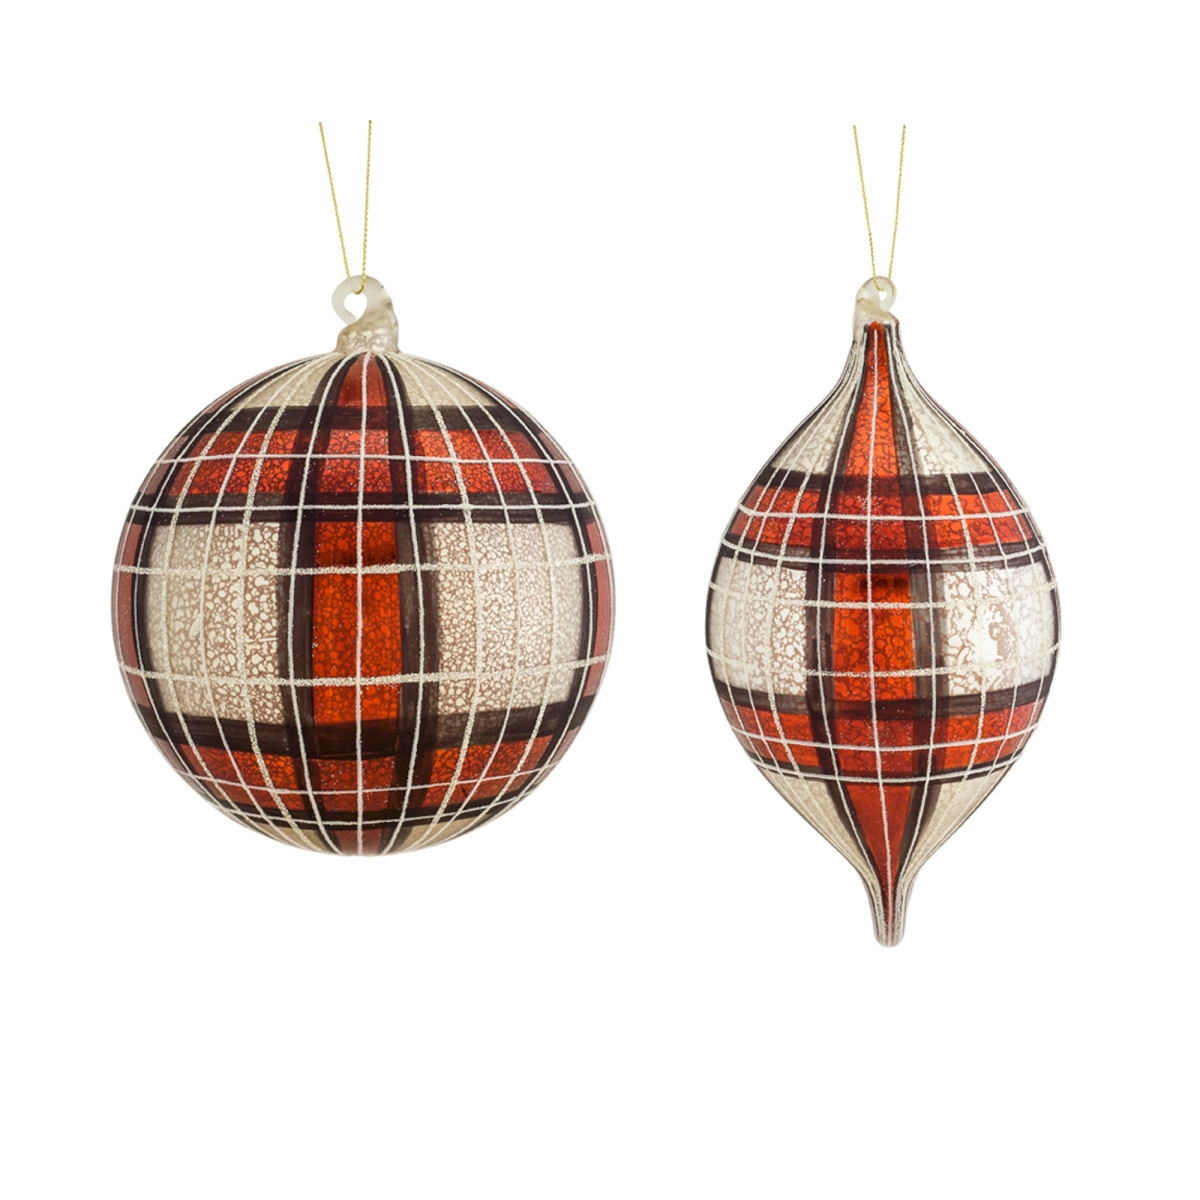 72122ds 8 X 10.5 In. Glass Plaid Ornament, Red & White - Set Of 4